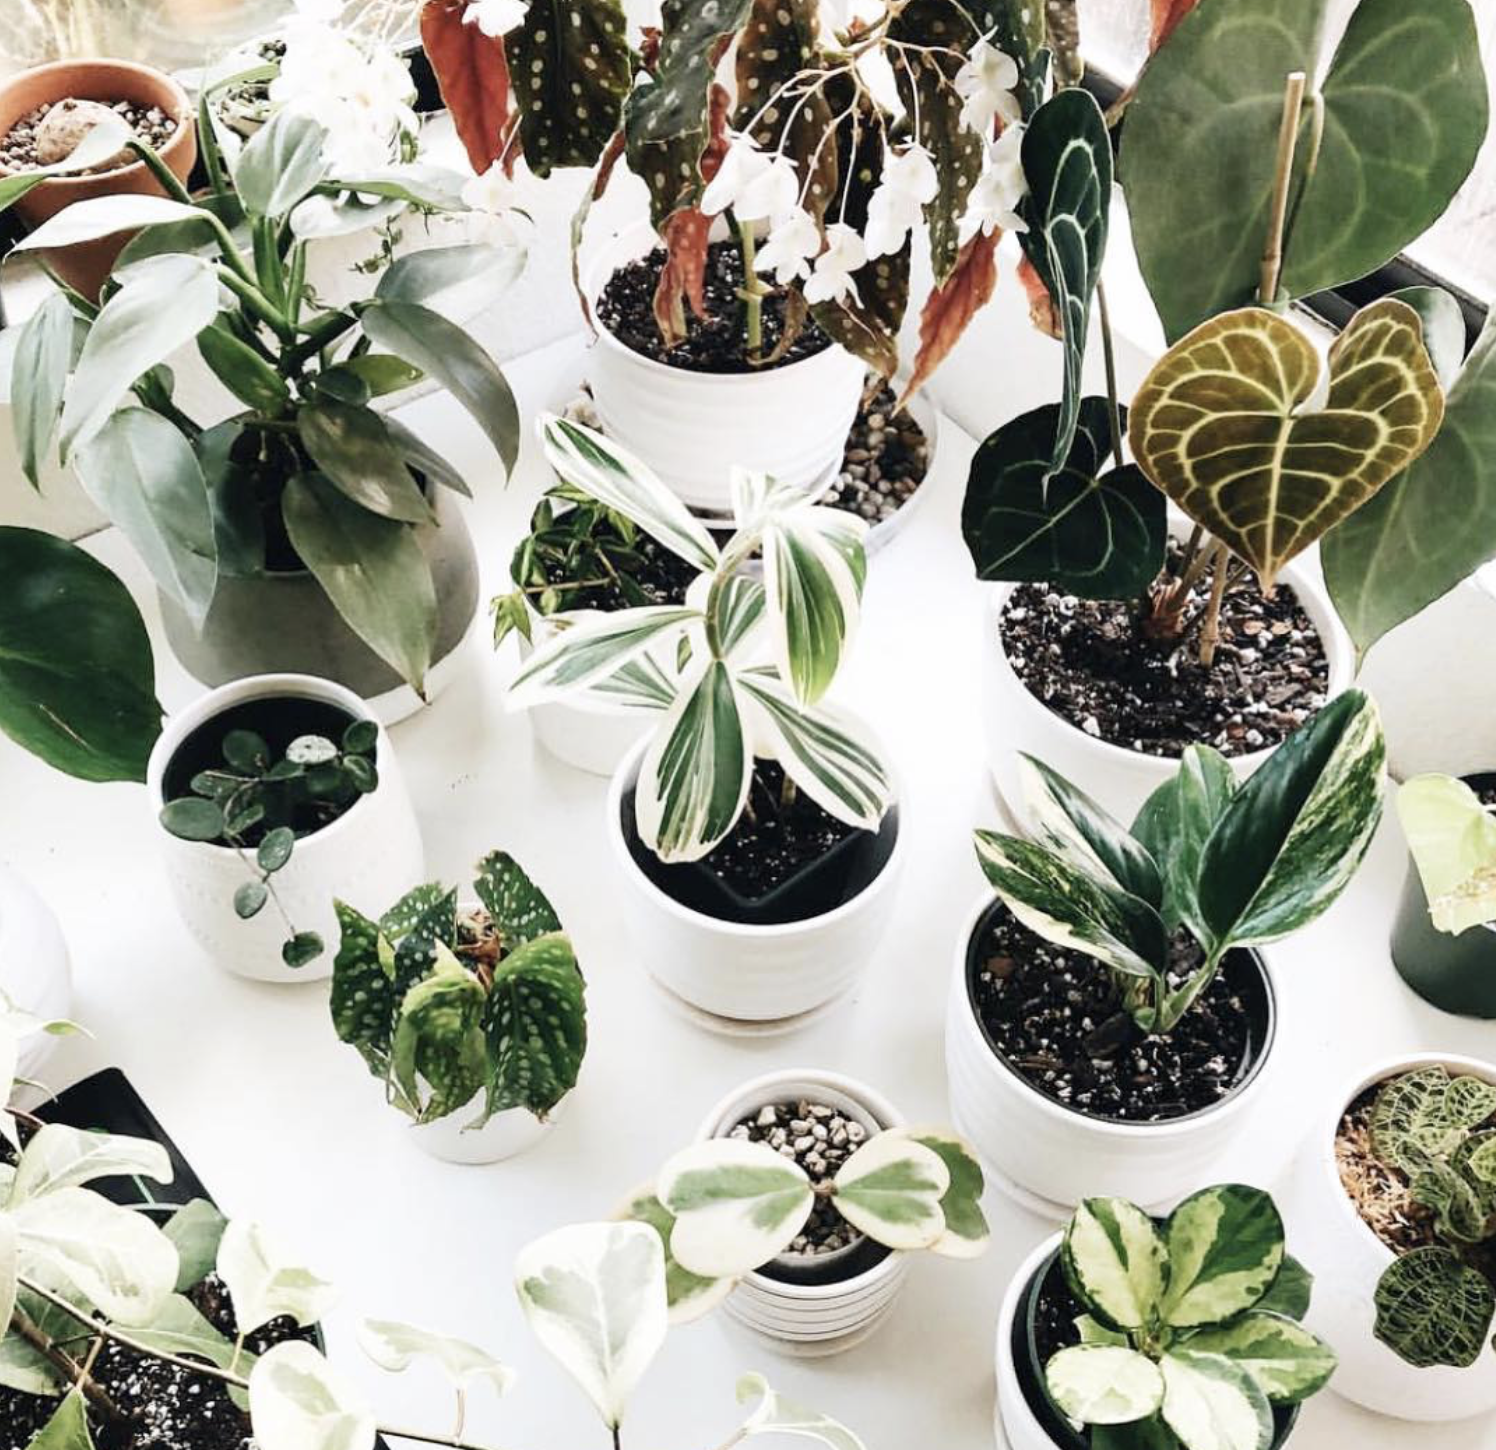 forever planty the potted jungle feel lifestyle blog luxury instagram